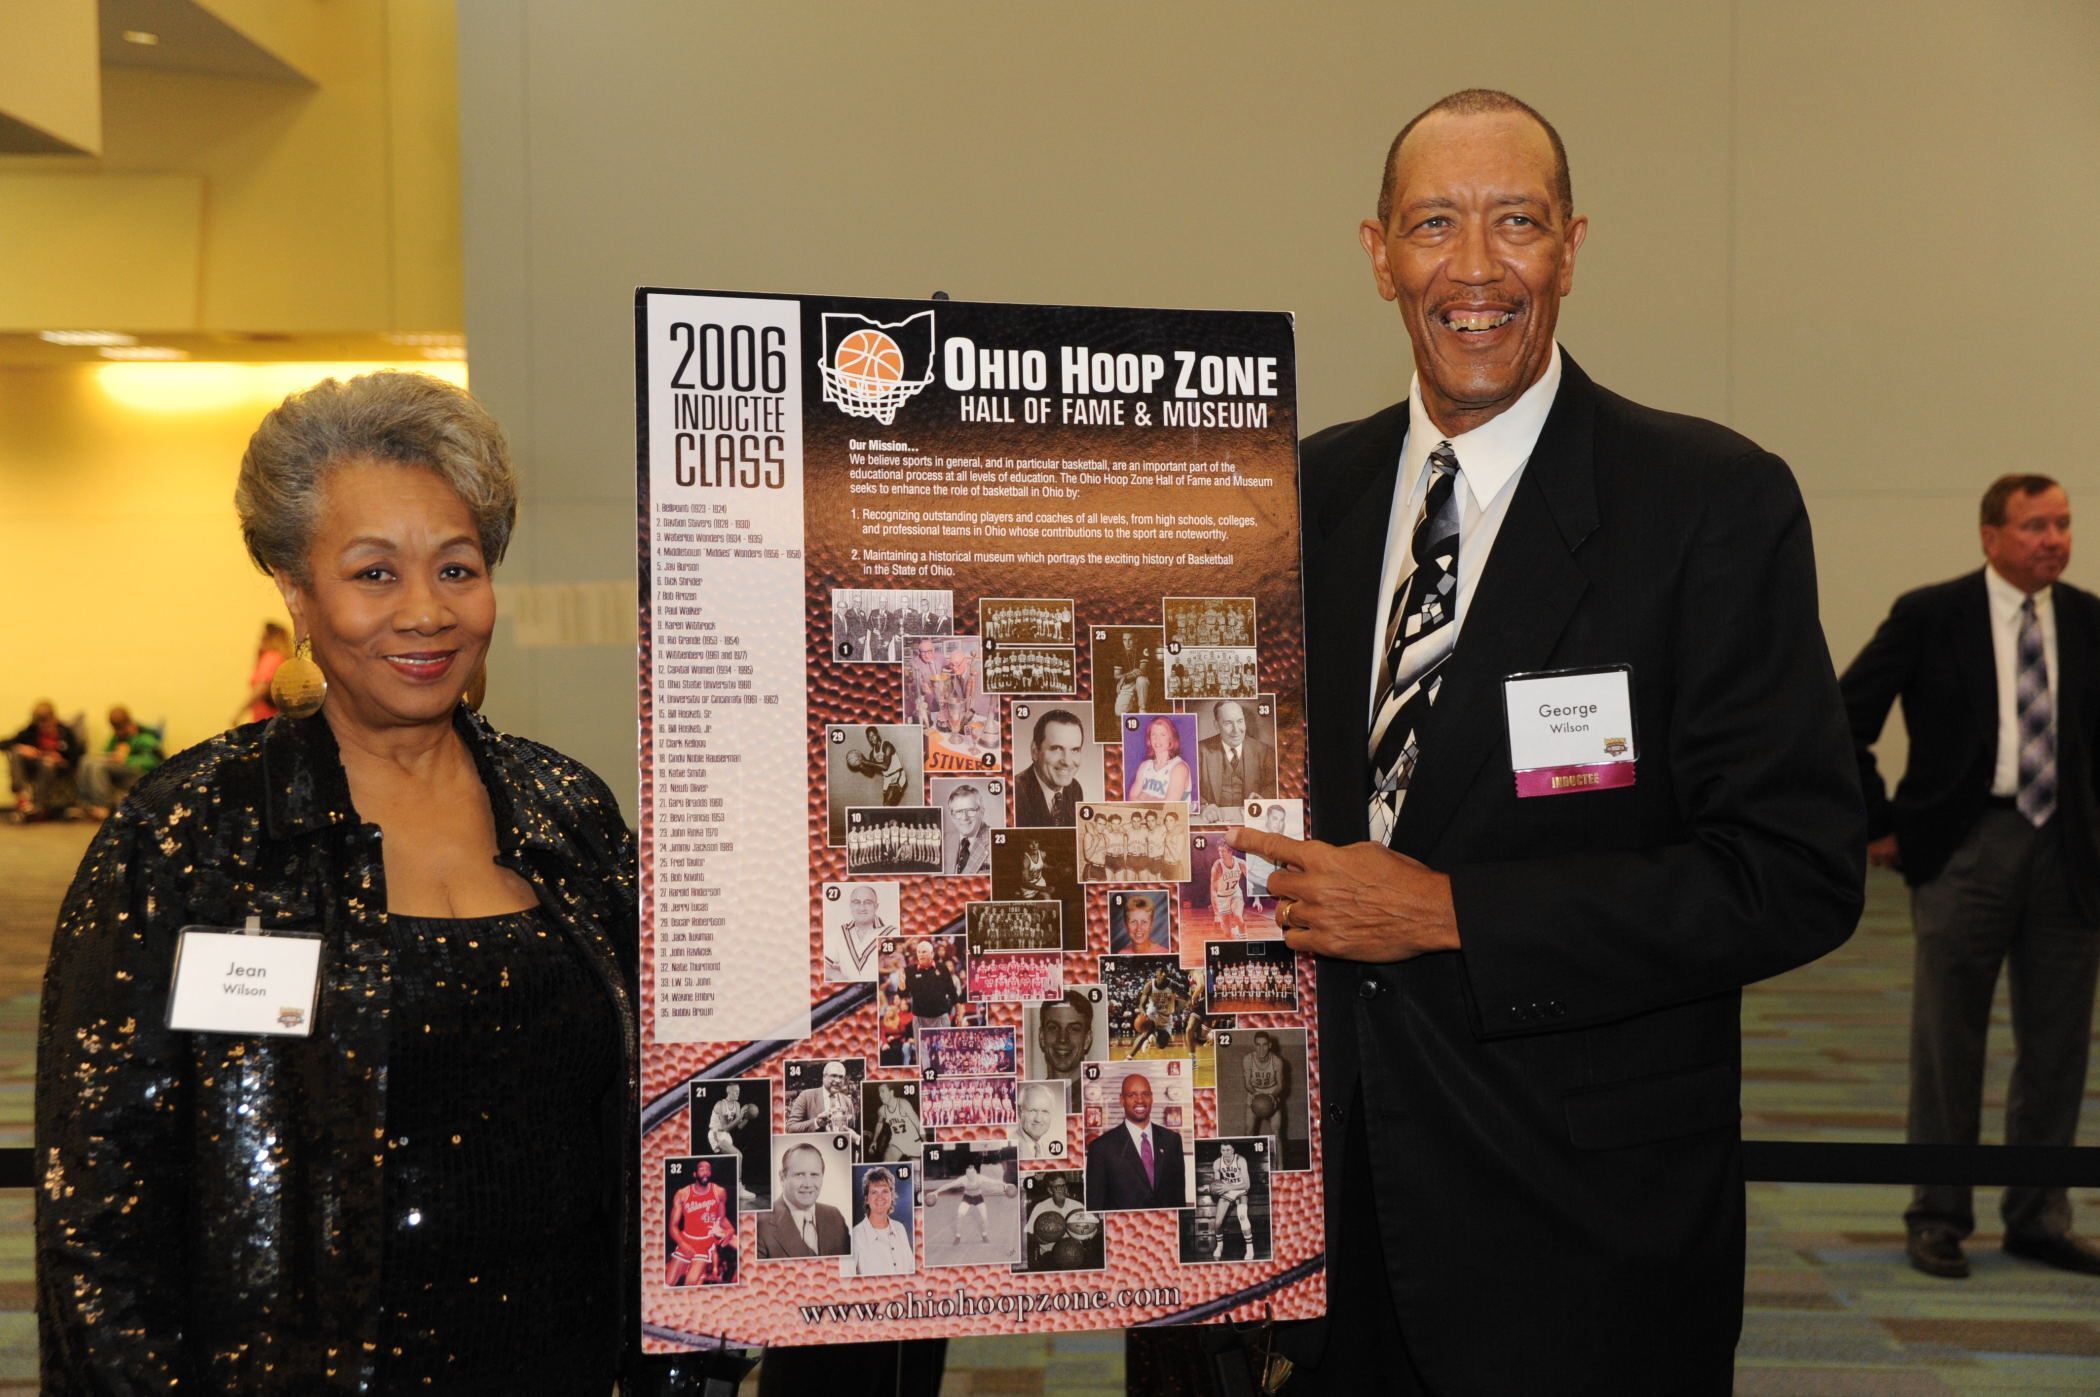 Jean and George Wilson at the 2010 Induction Ceremony